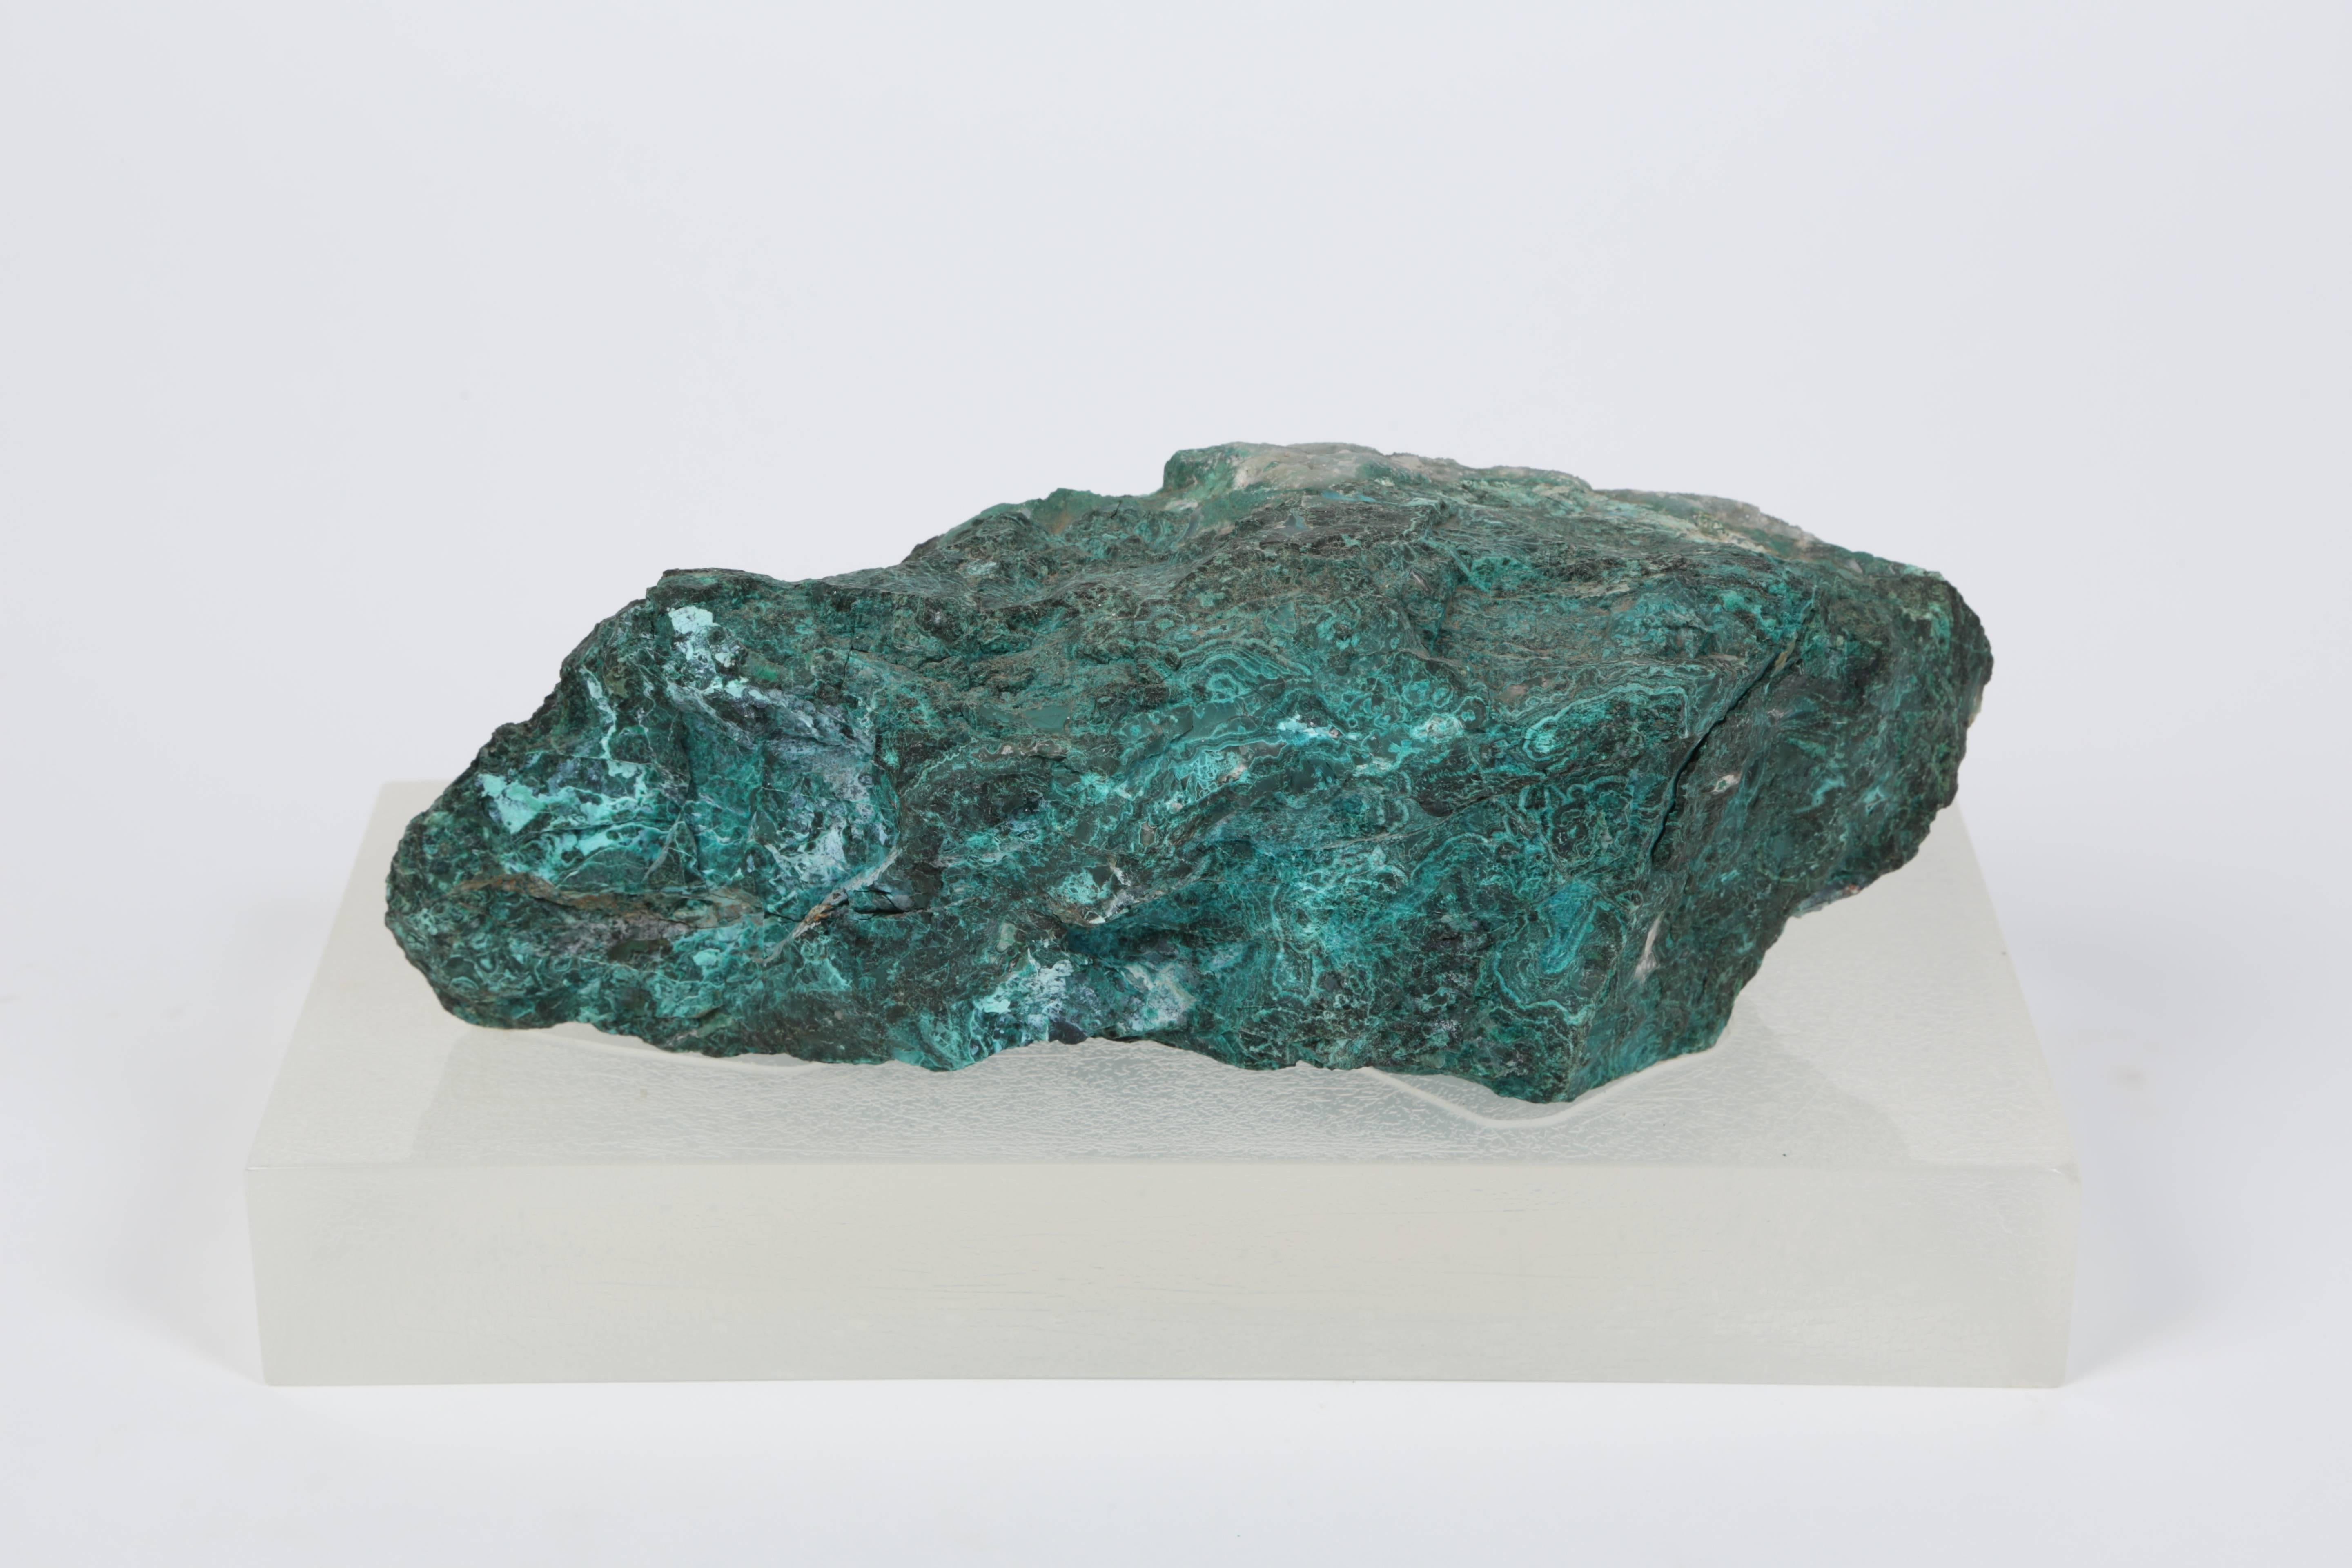 American Large Malachite Specimen on Lucite Plinth from the Brody House